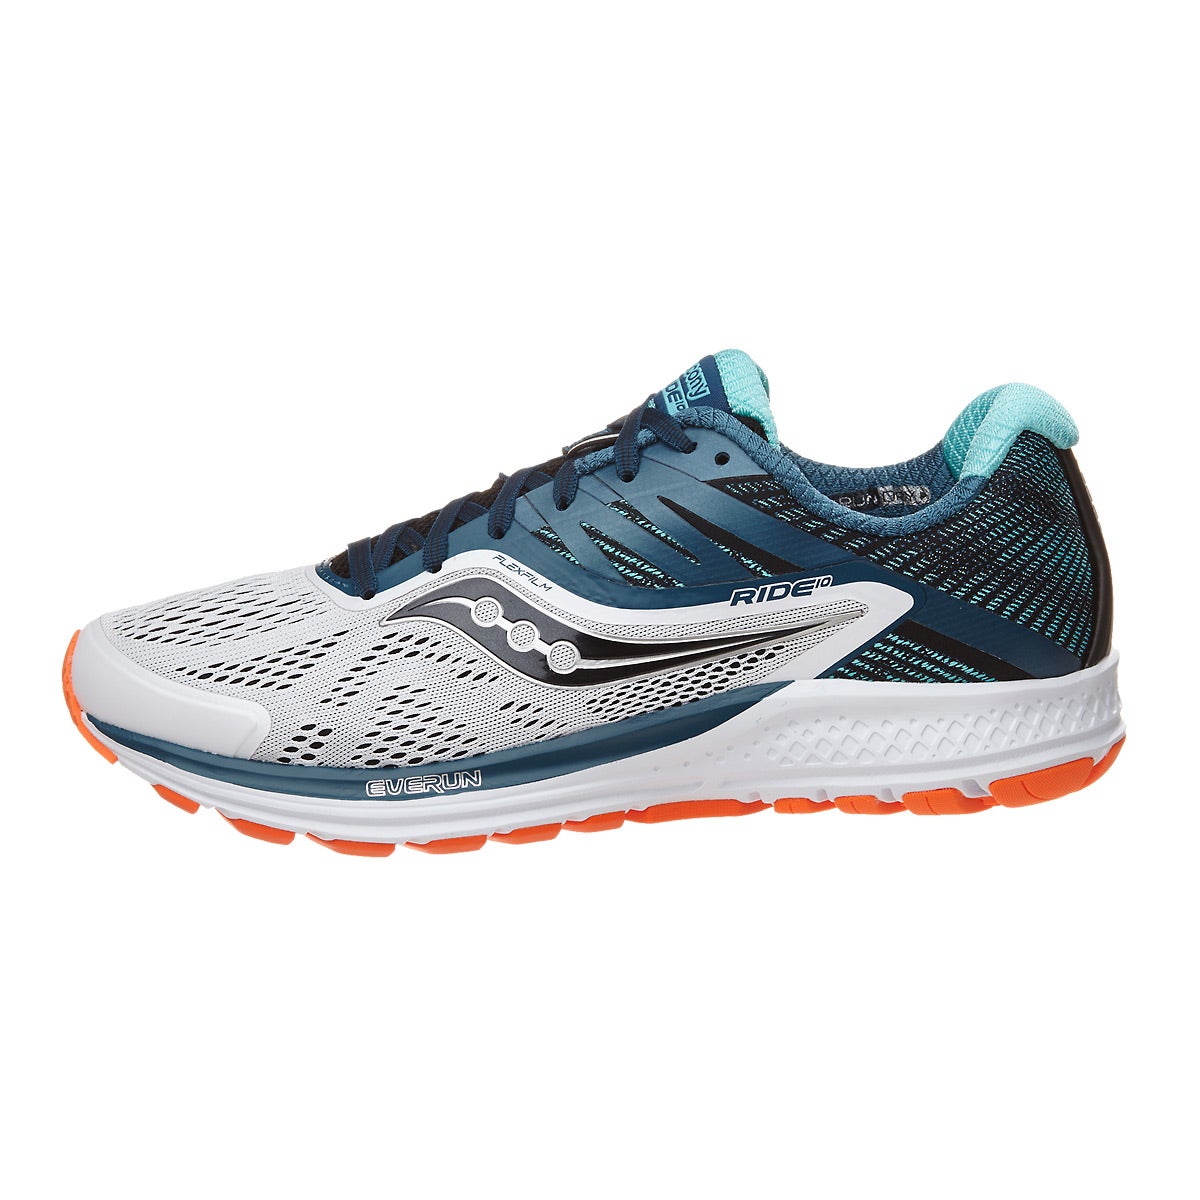 Saucony Ride 10 Men's Shoes White/Teal 